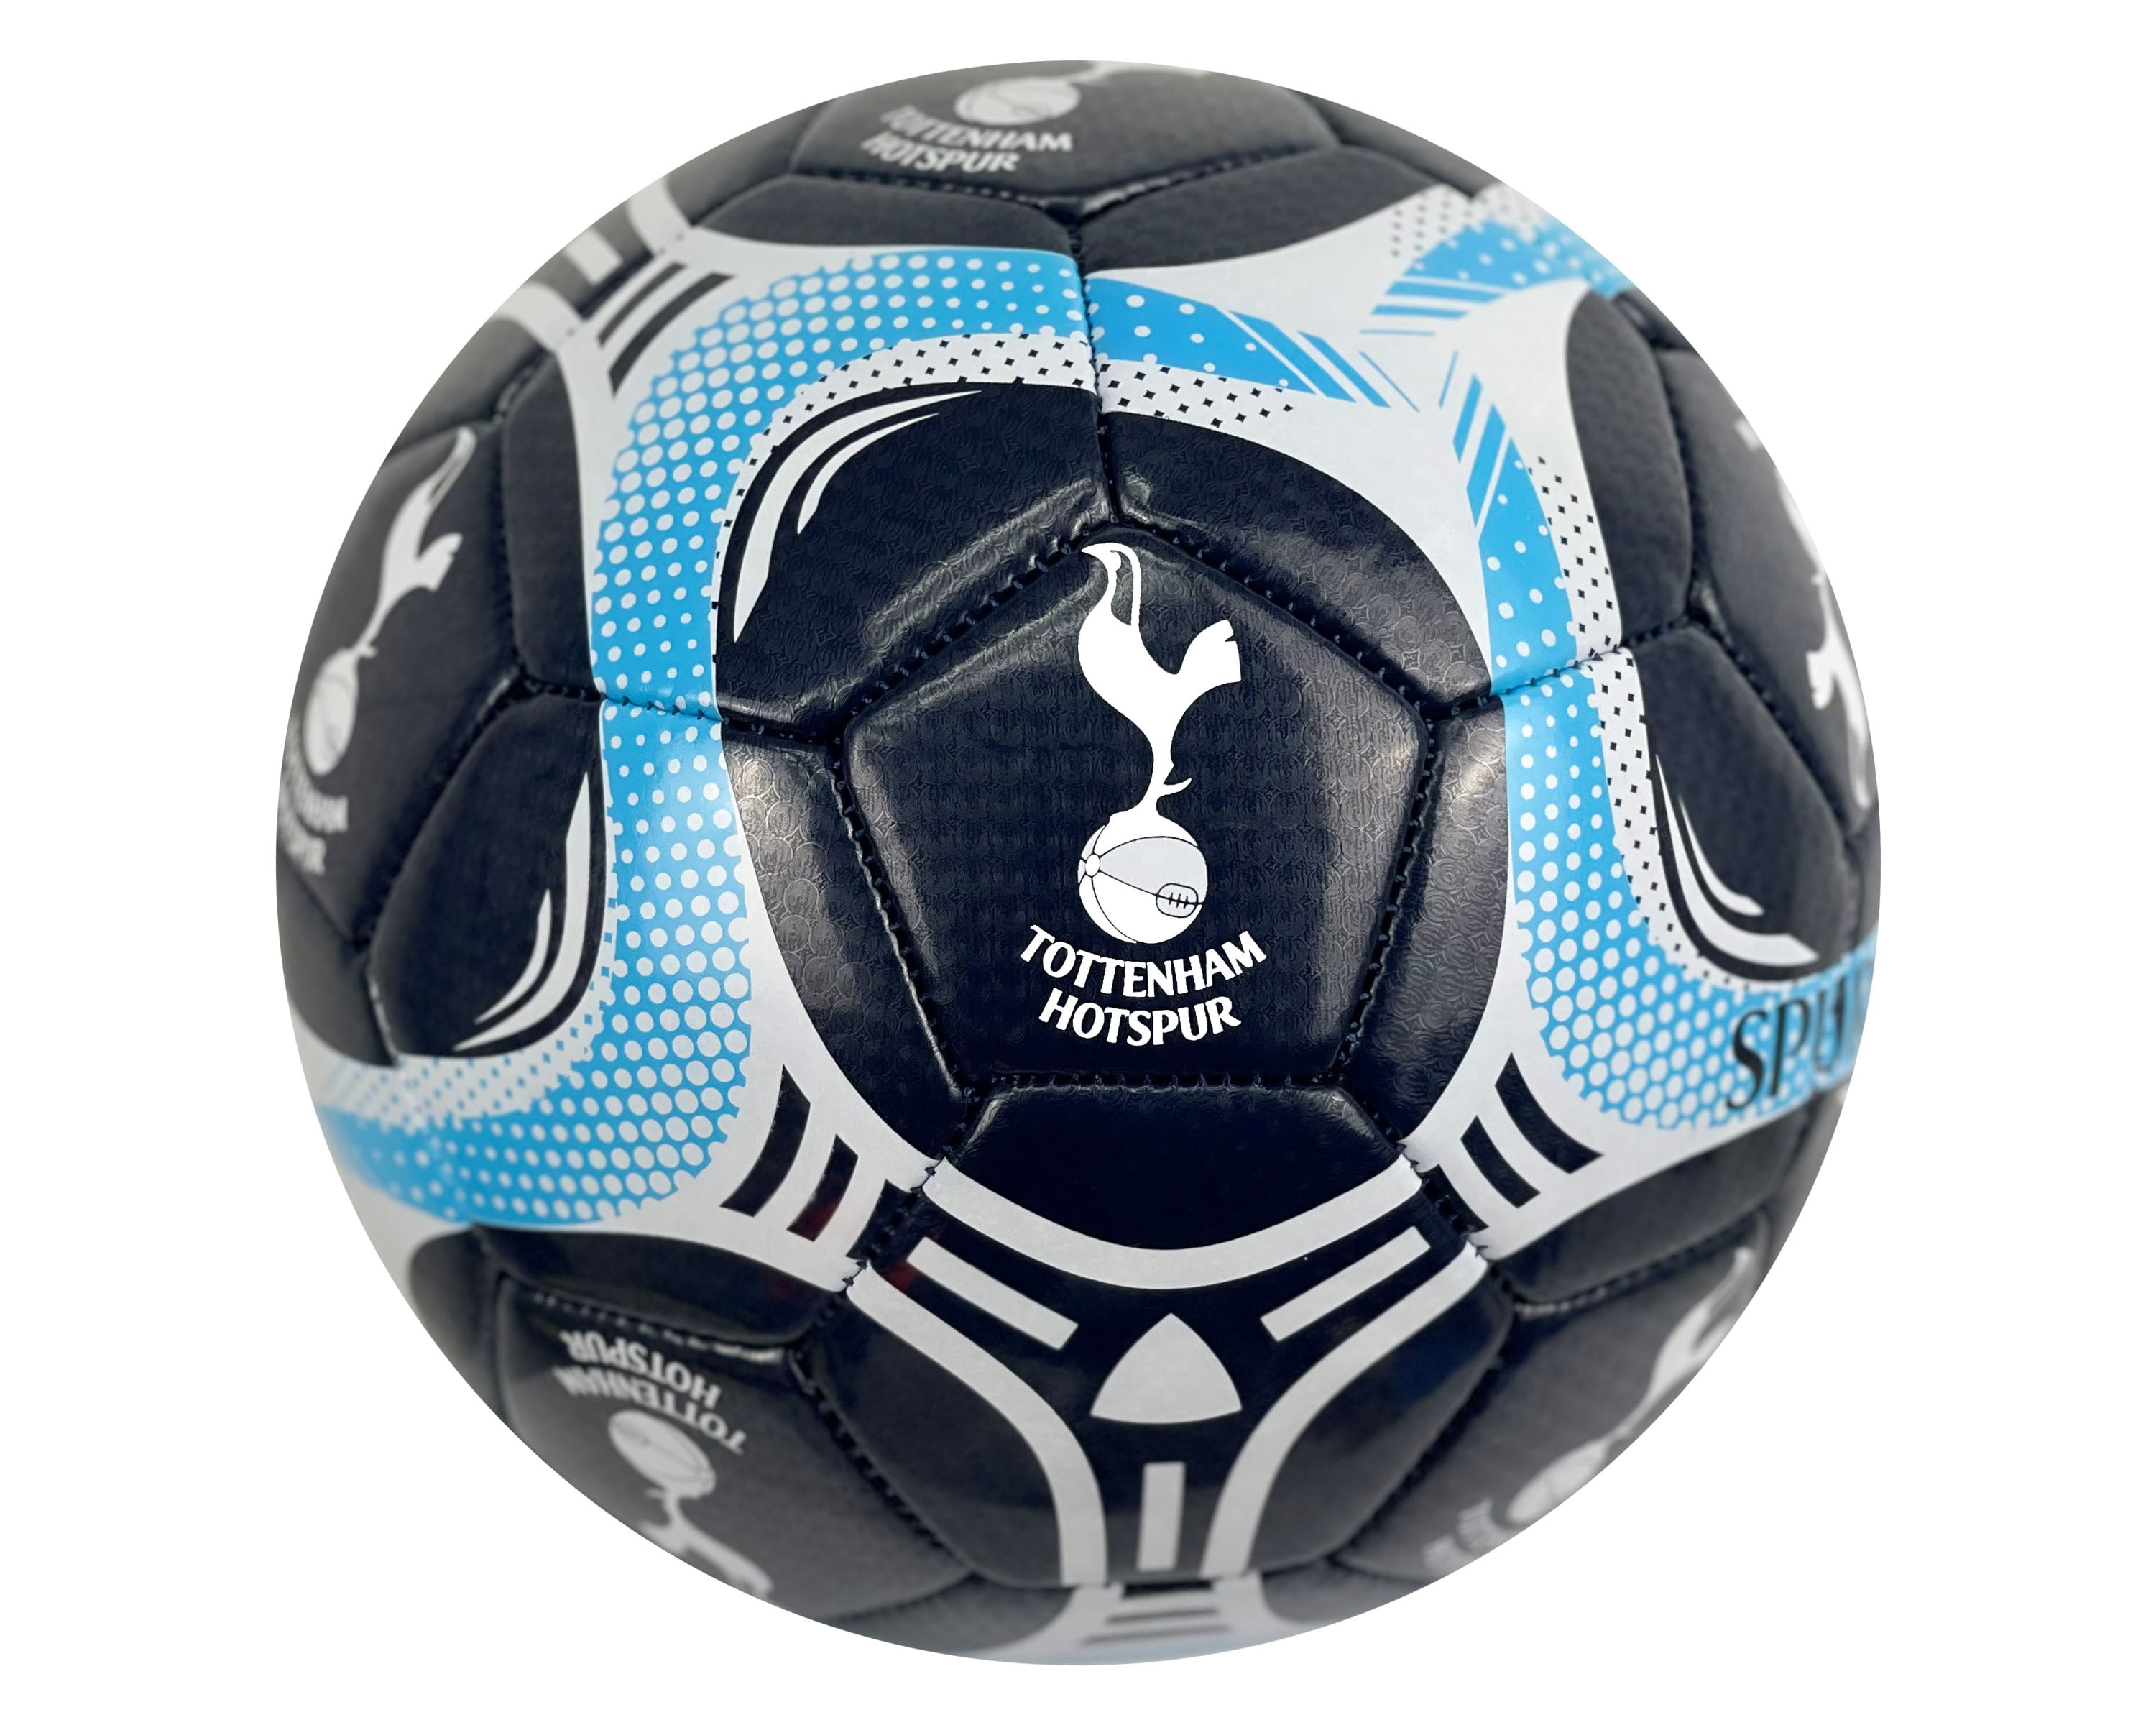 Tottenham Hotspur F.C Authentic Official Licensed Soccer Ball Size 5-04-3 